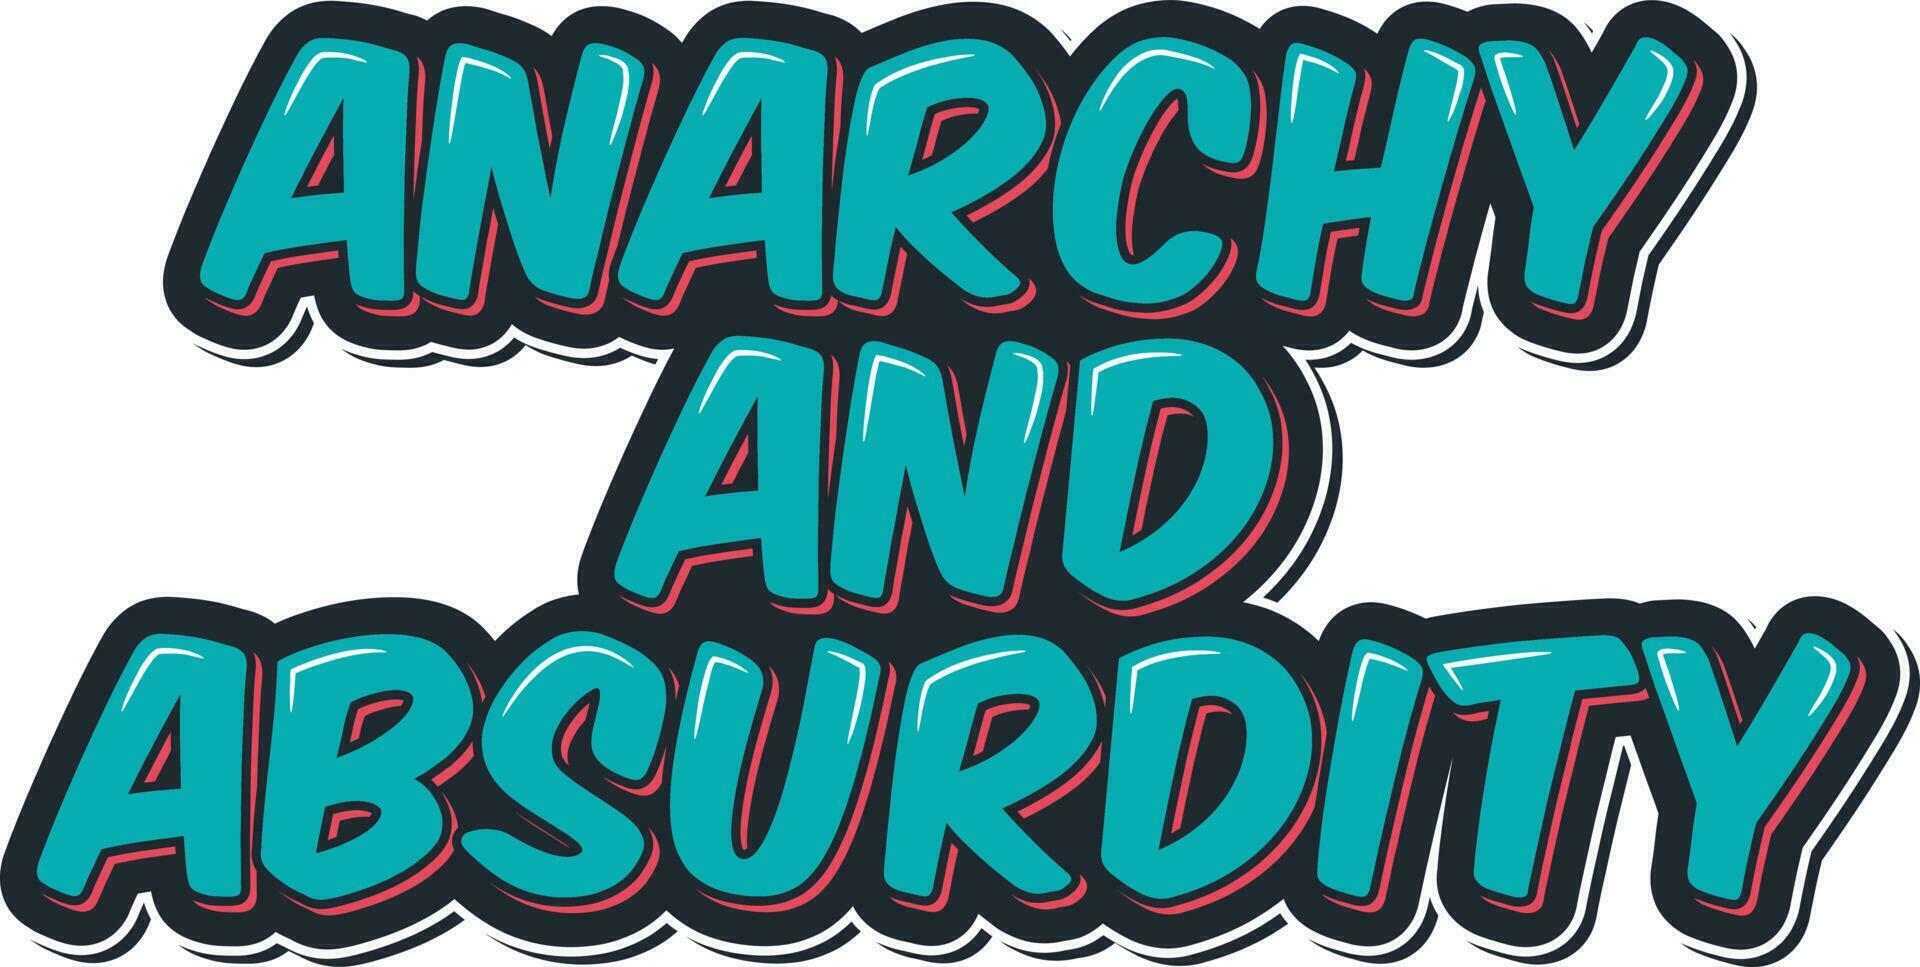 Anarchy and Absurdity Lettering Vector Design